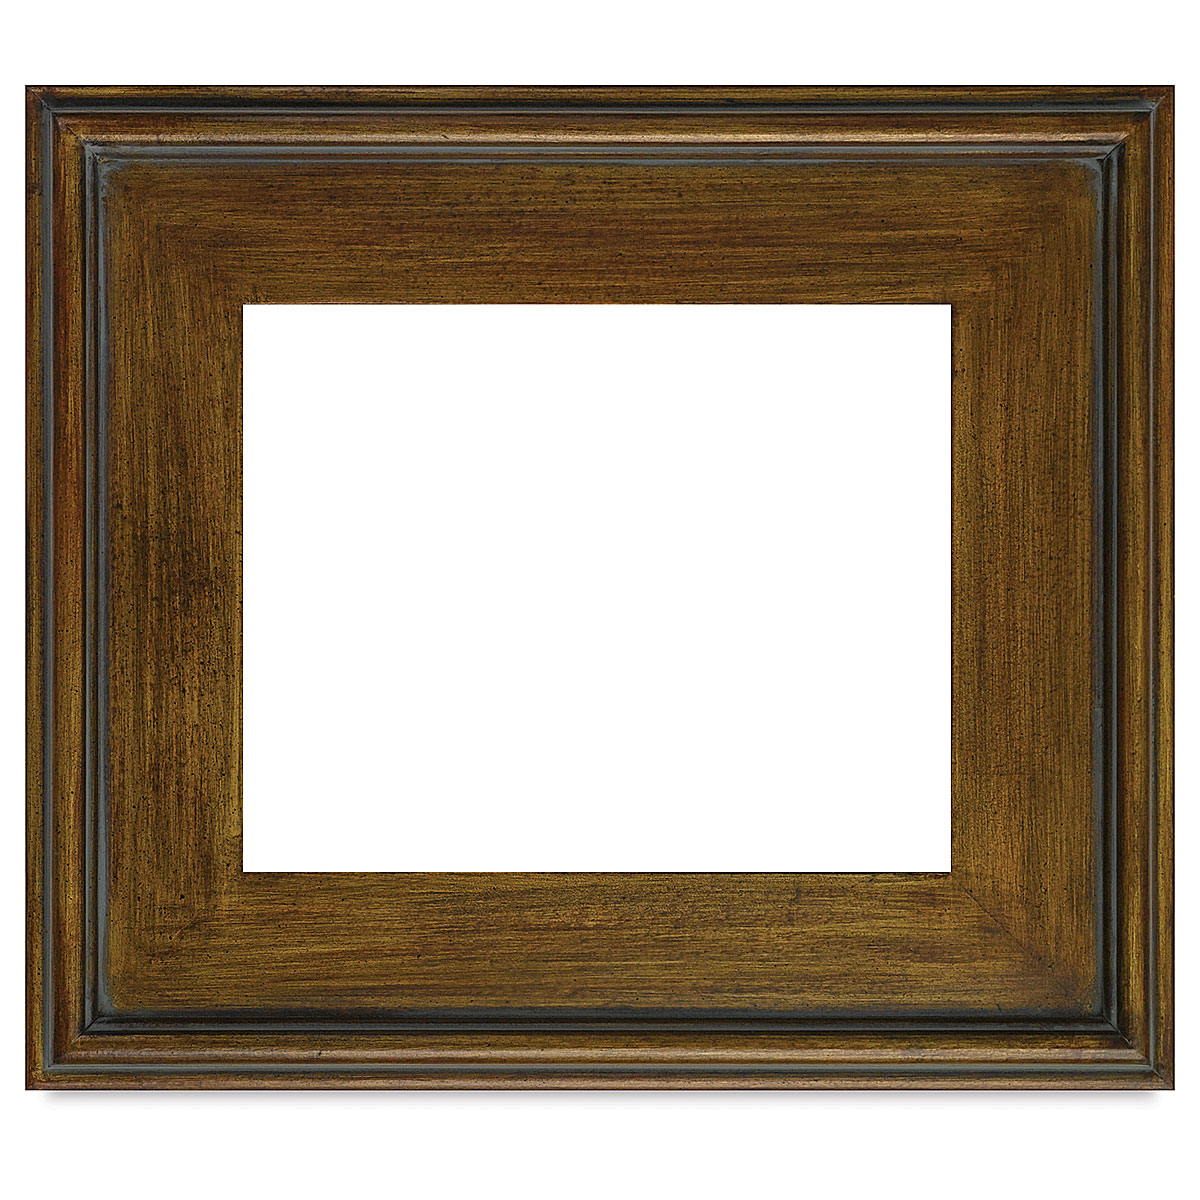 12x12 Canvas Frame Silver & White Solid Wood Floater Frame Width 1.5 Inches  | Interior Frame Depth 1 9/16 Inches | Phila Contemporary Canvas Frame